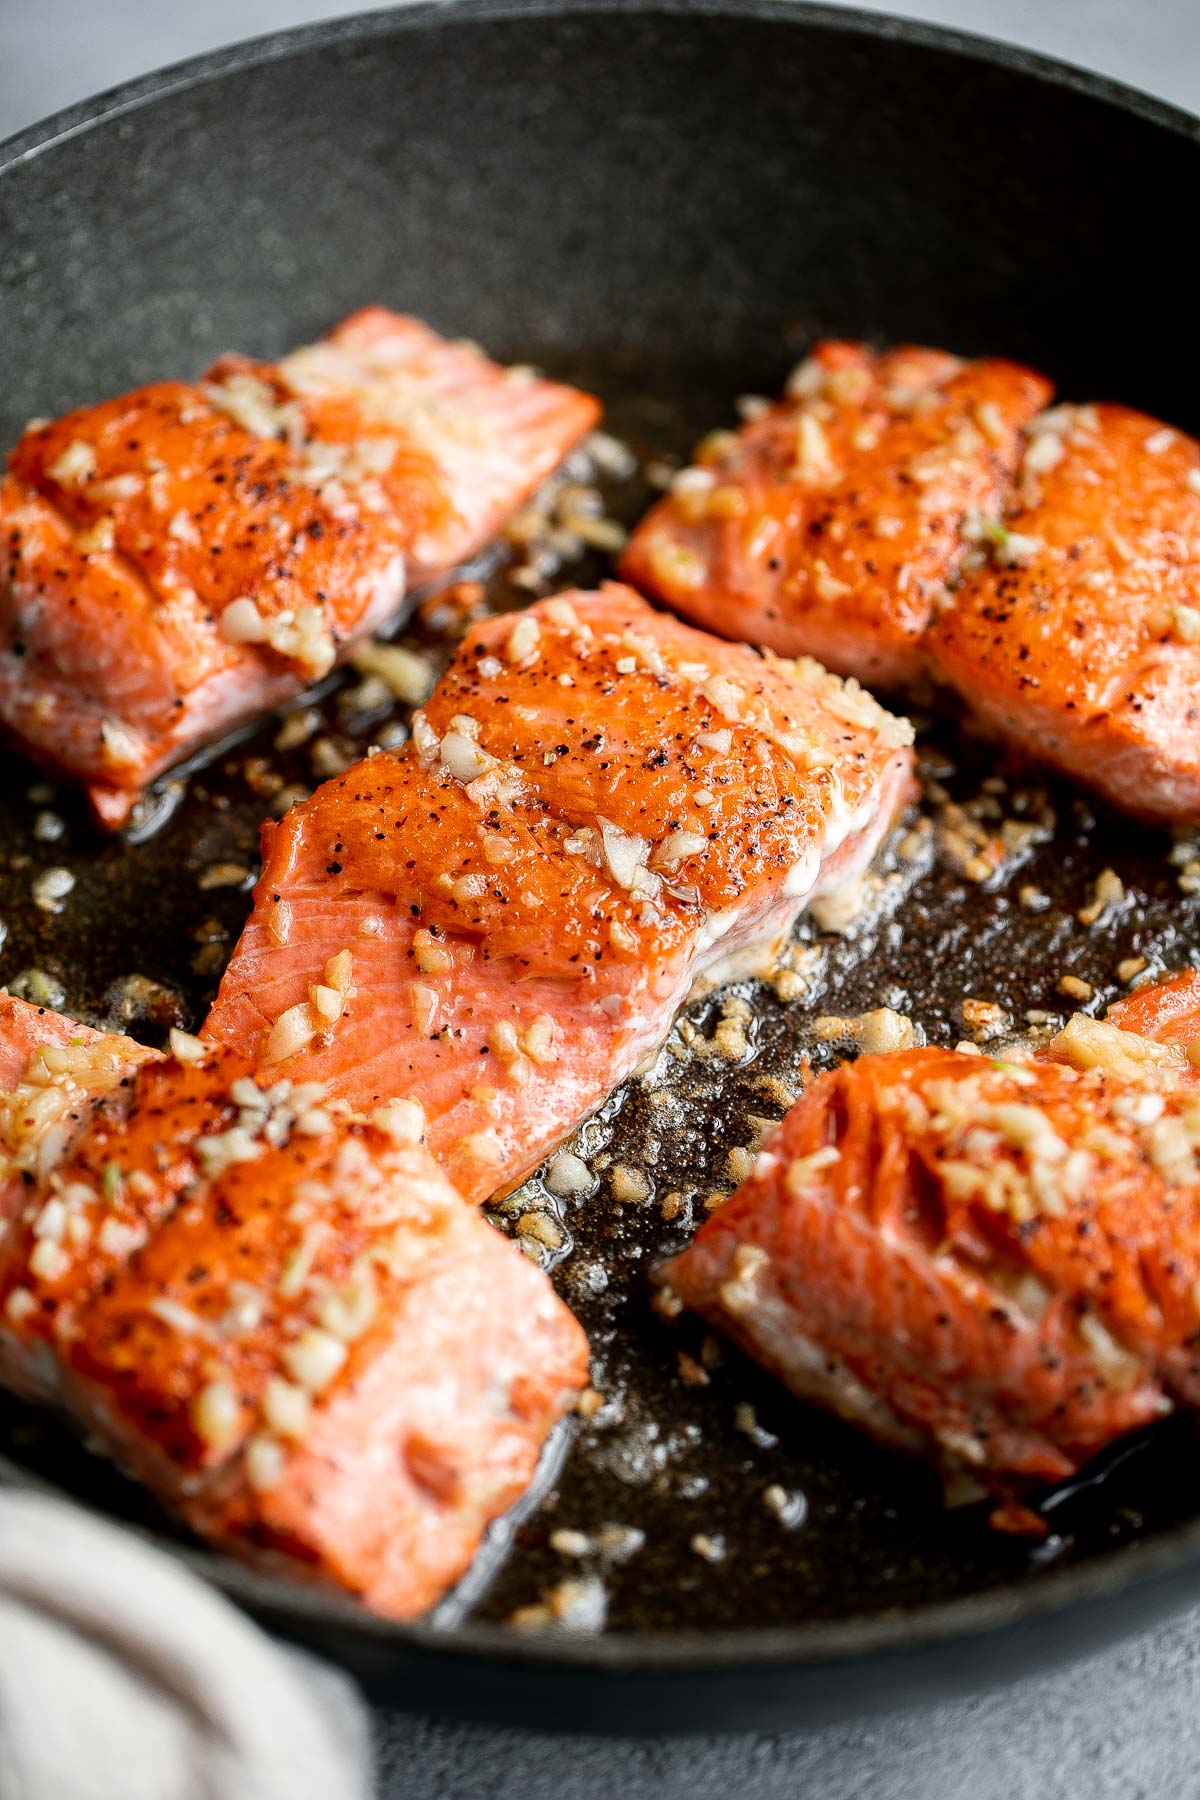 Tender, flaky, flavorful garlic butter salmon is well-seasoned, seared to perfection, and basted until juicy. Quick and easy to make in 20 minutes. | aheadofthyme.com